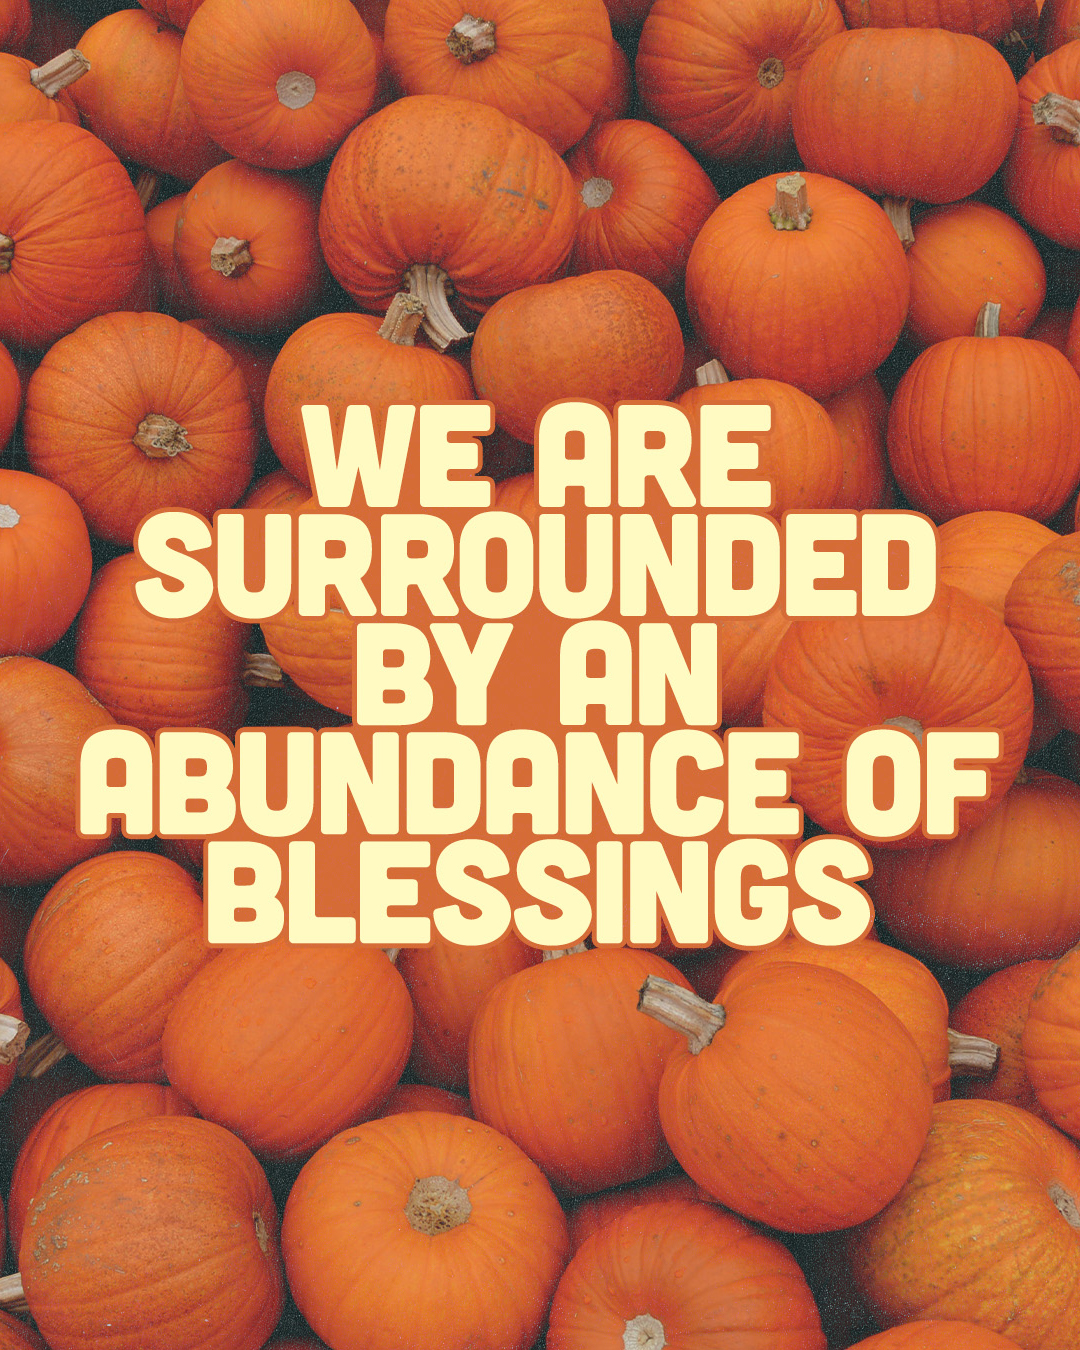 We are surrounded by an abundance of blessings